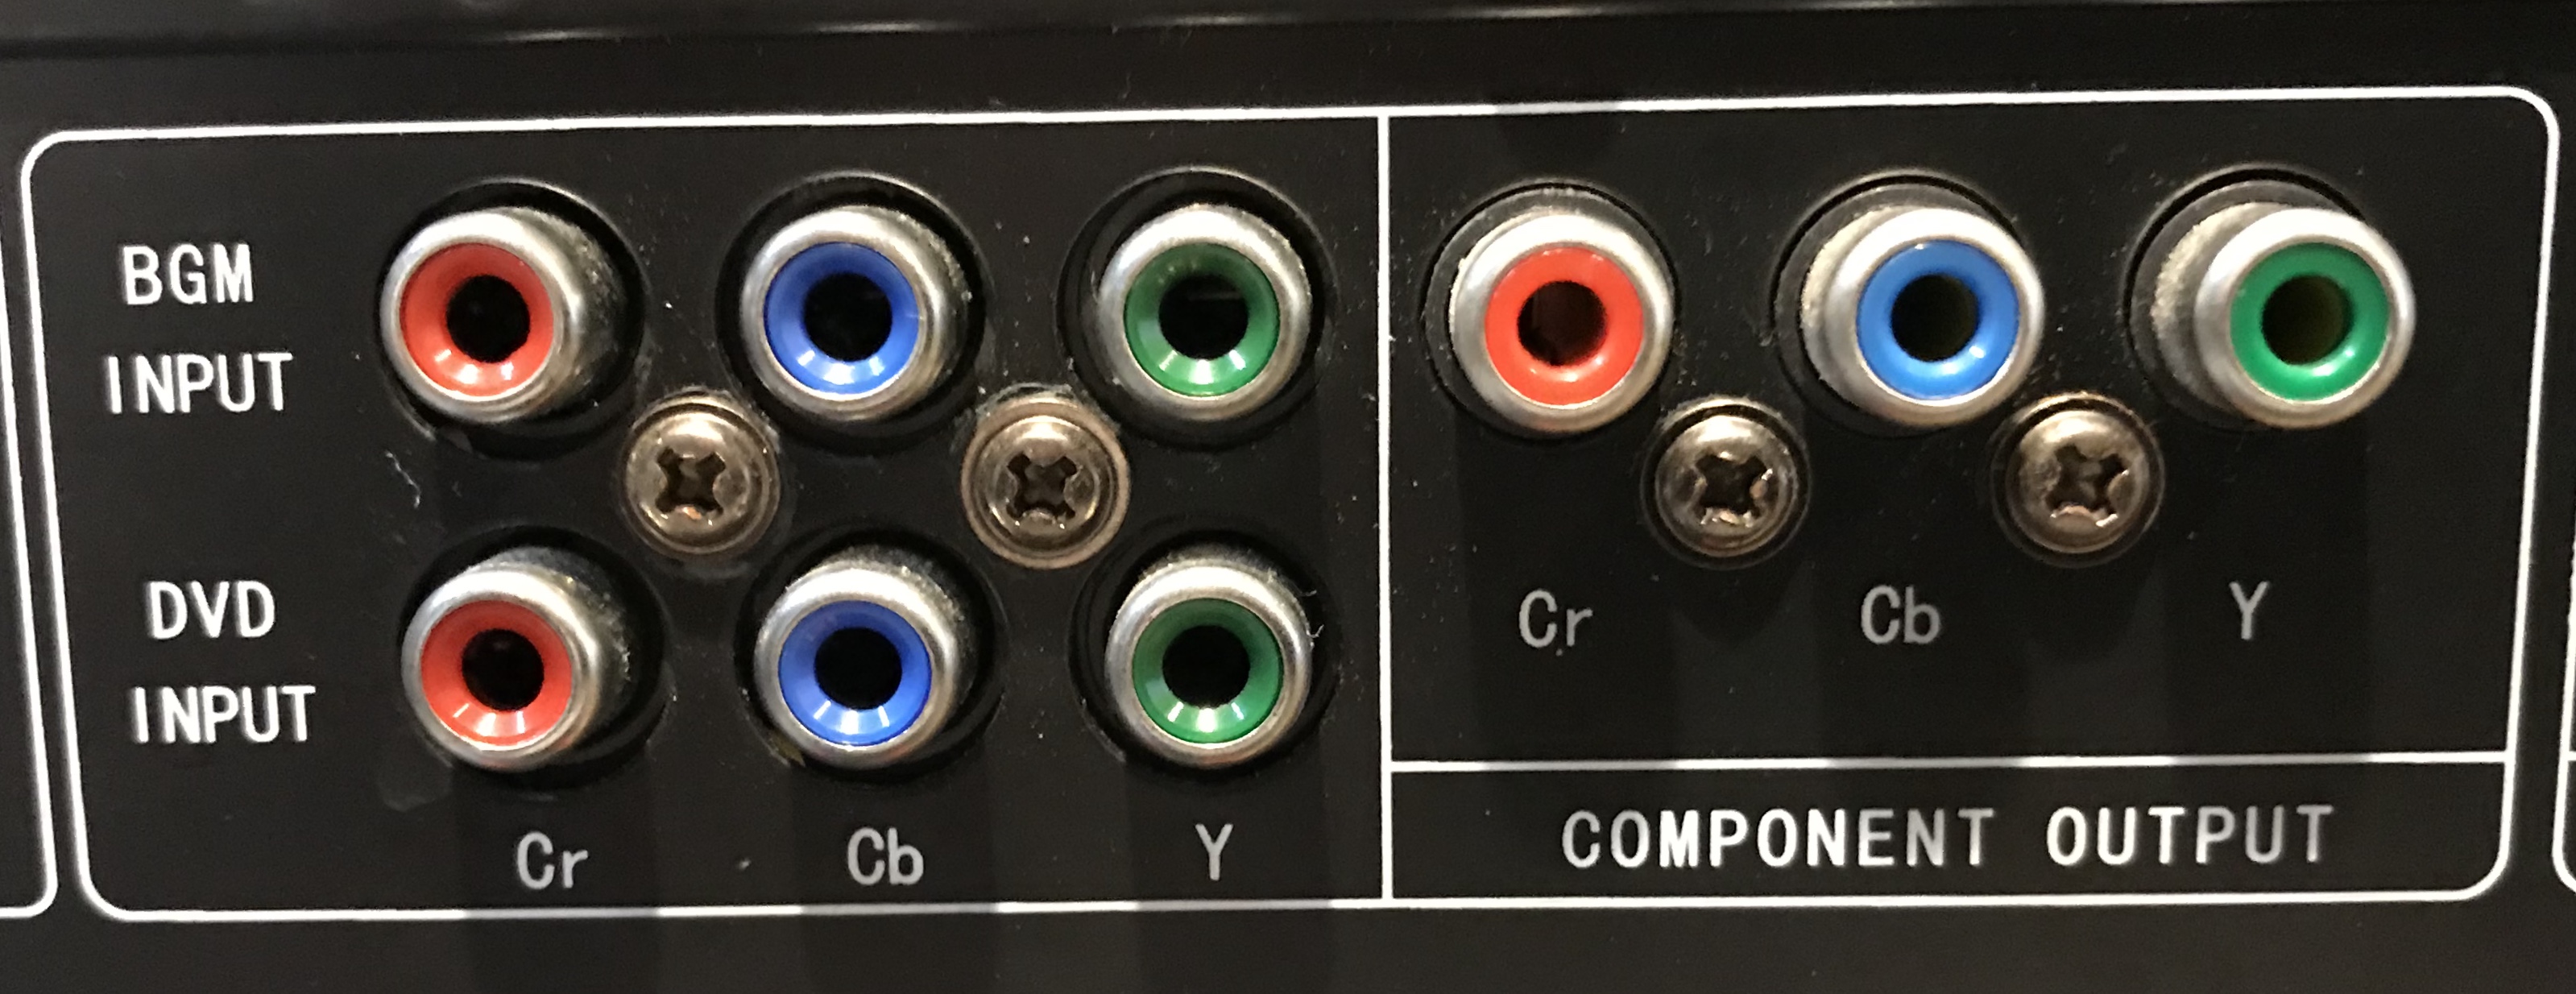 Component Video